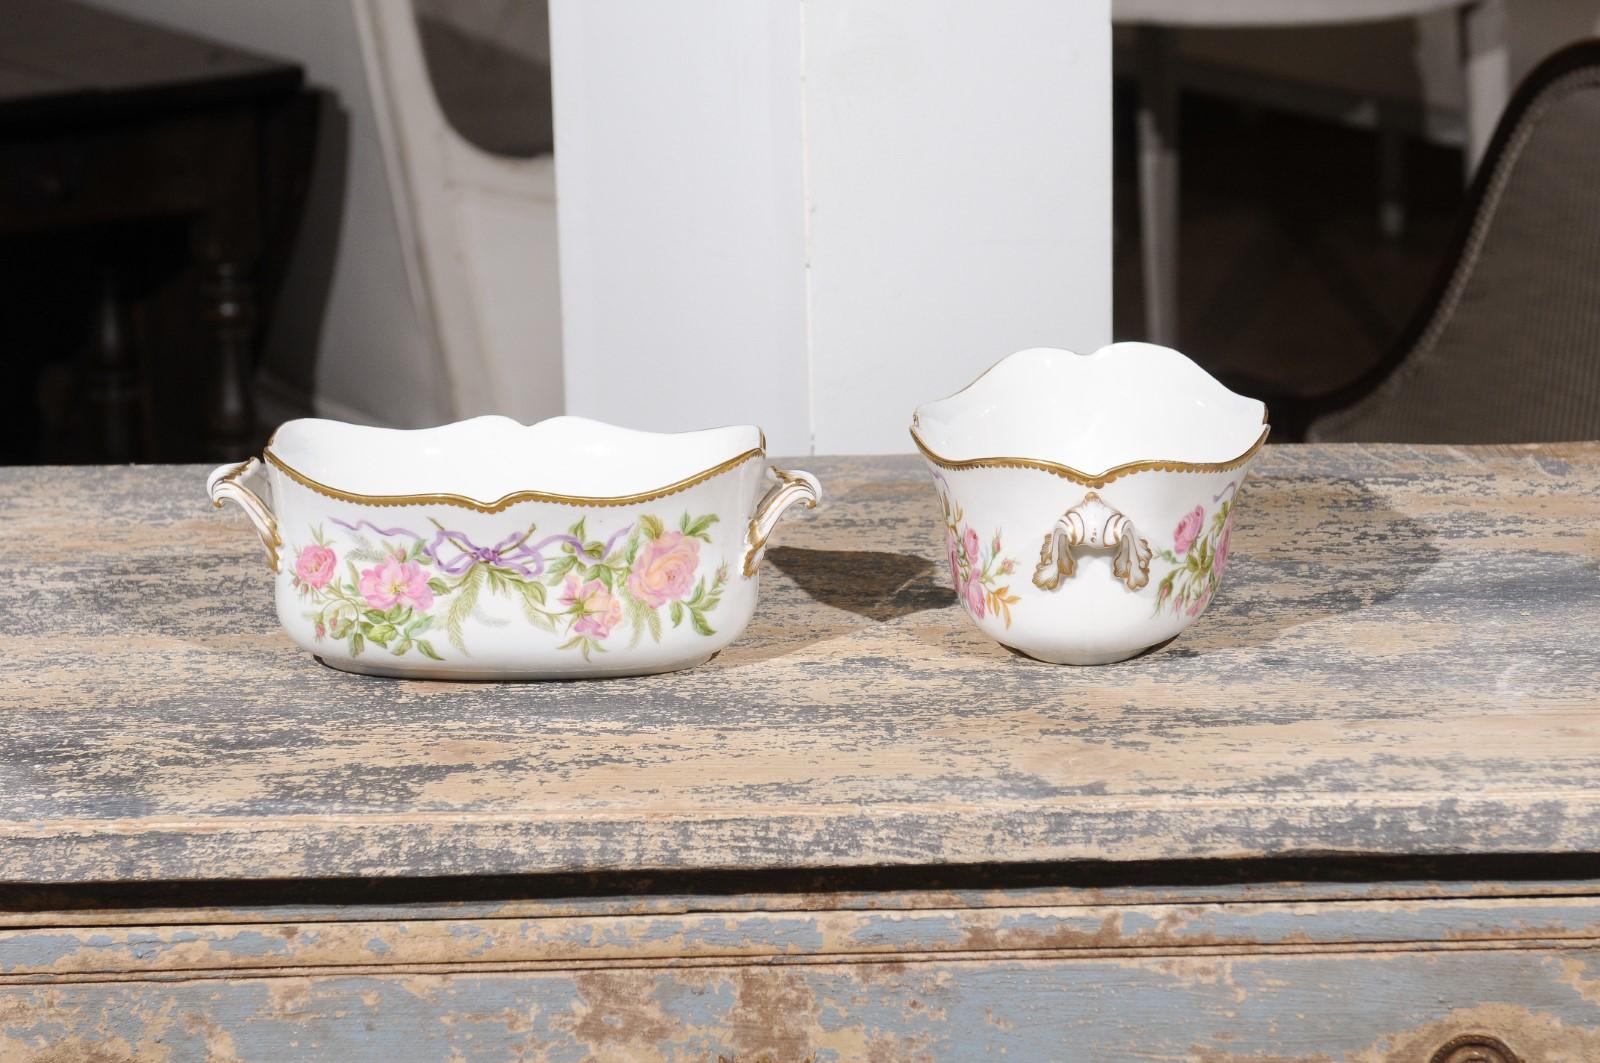 English Porcelain Bowls Depicting Bouquets of Pink Roses with Gilt Accents 3